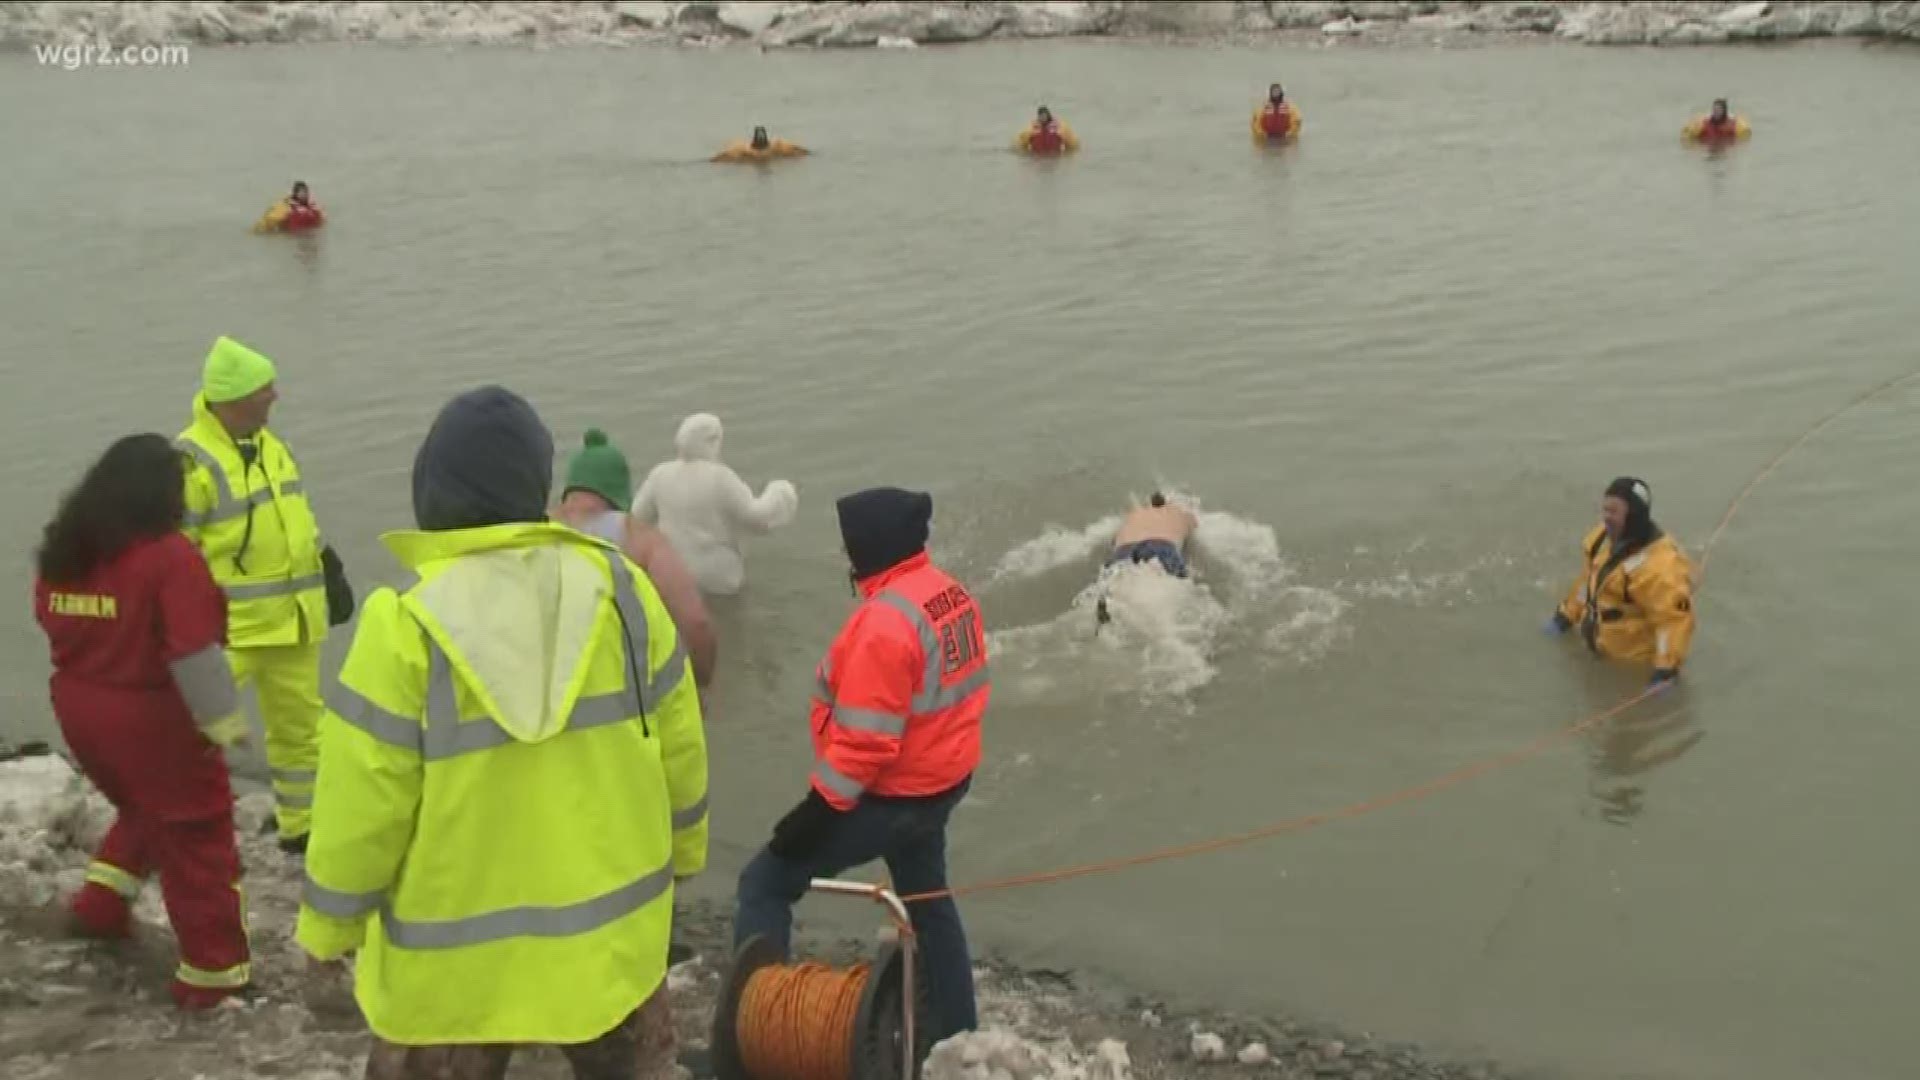 Dozens of people are expected to brave the cold today in Silver Creek for the annual Polar Bear Swim. The event raises money for several charities.